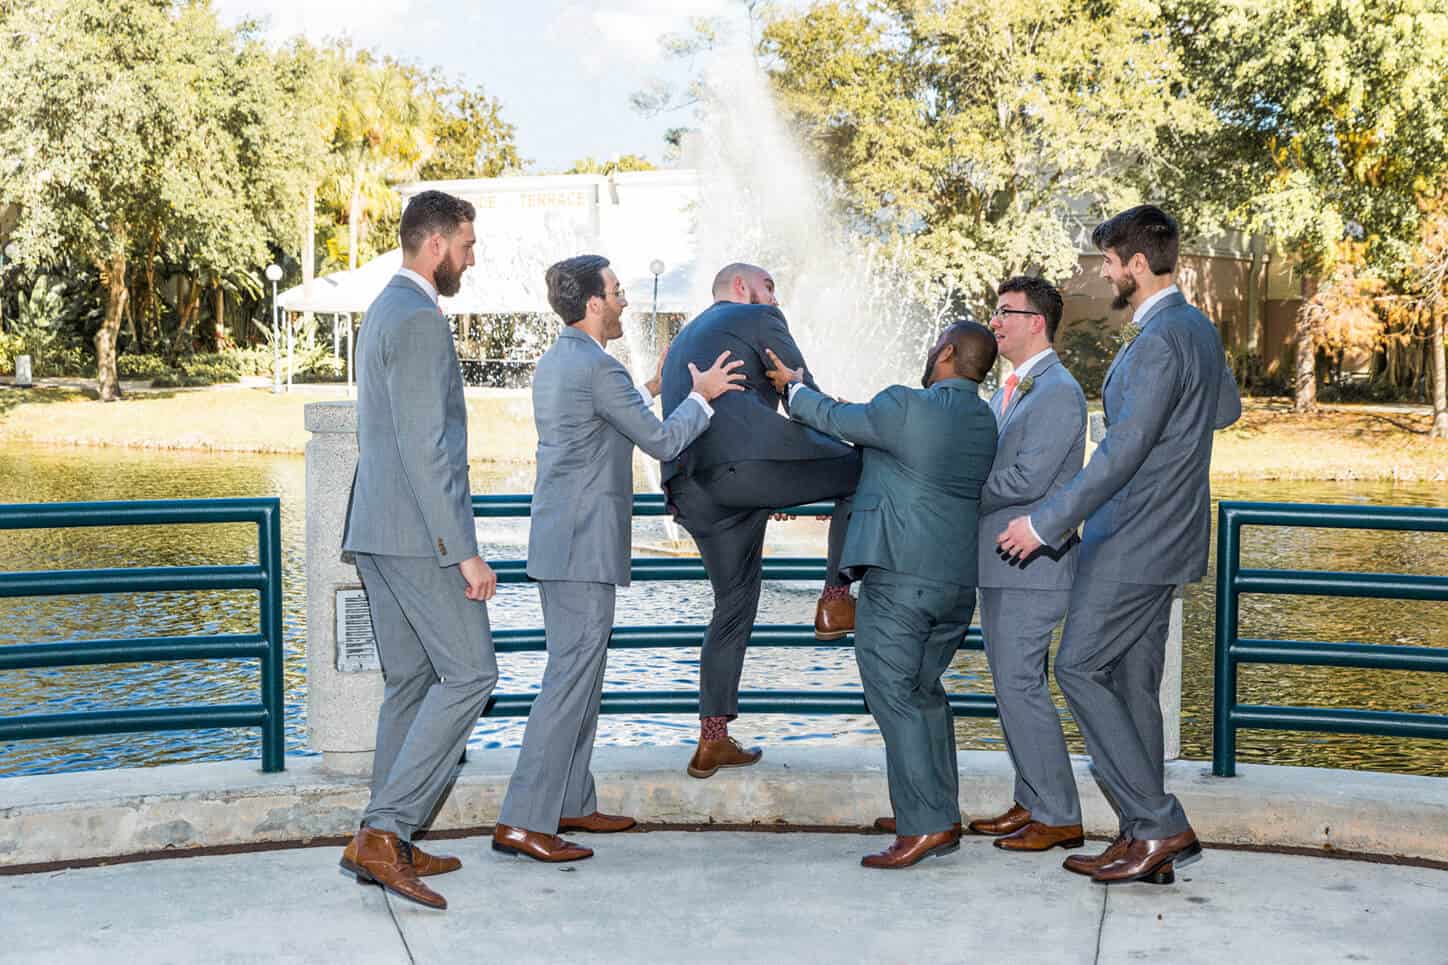 Wedding Party Photo of the Groom and Groomsmen